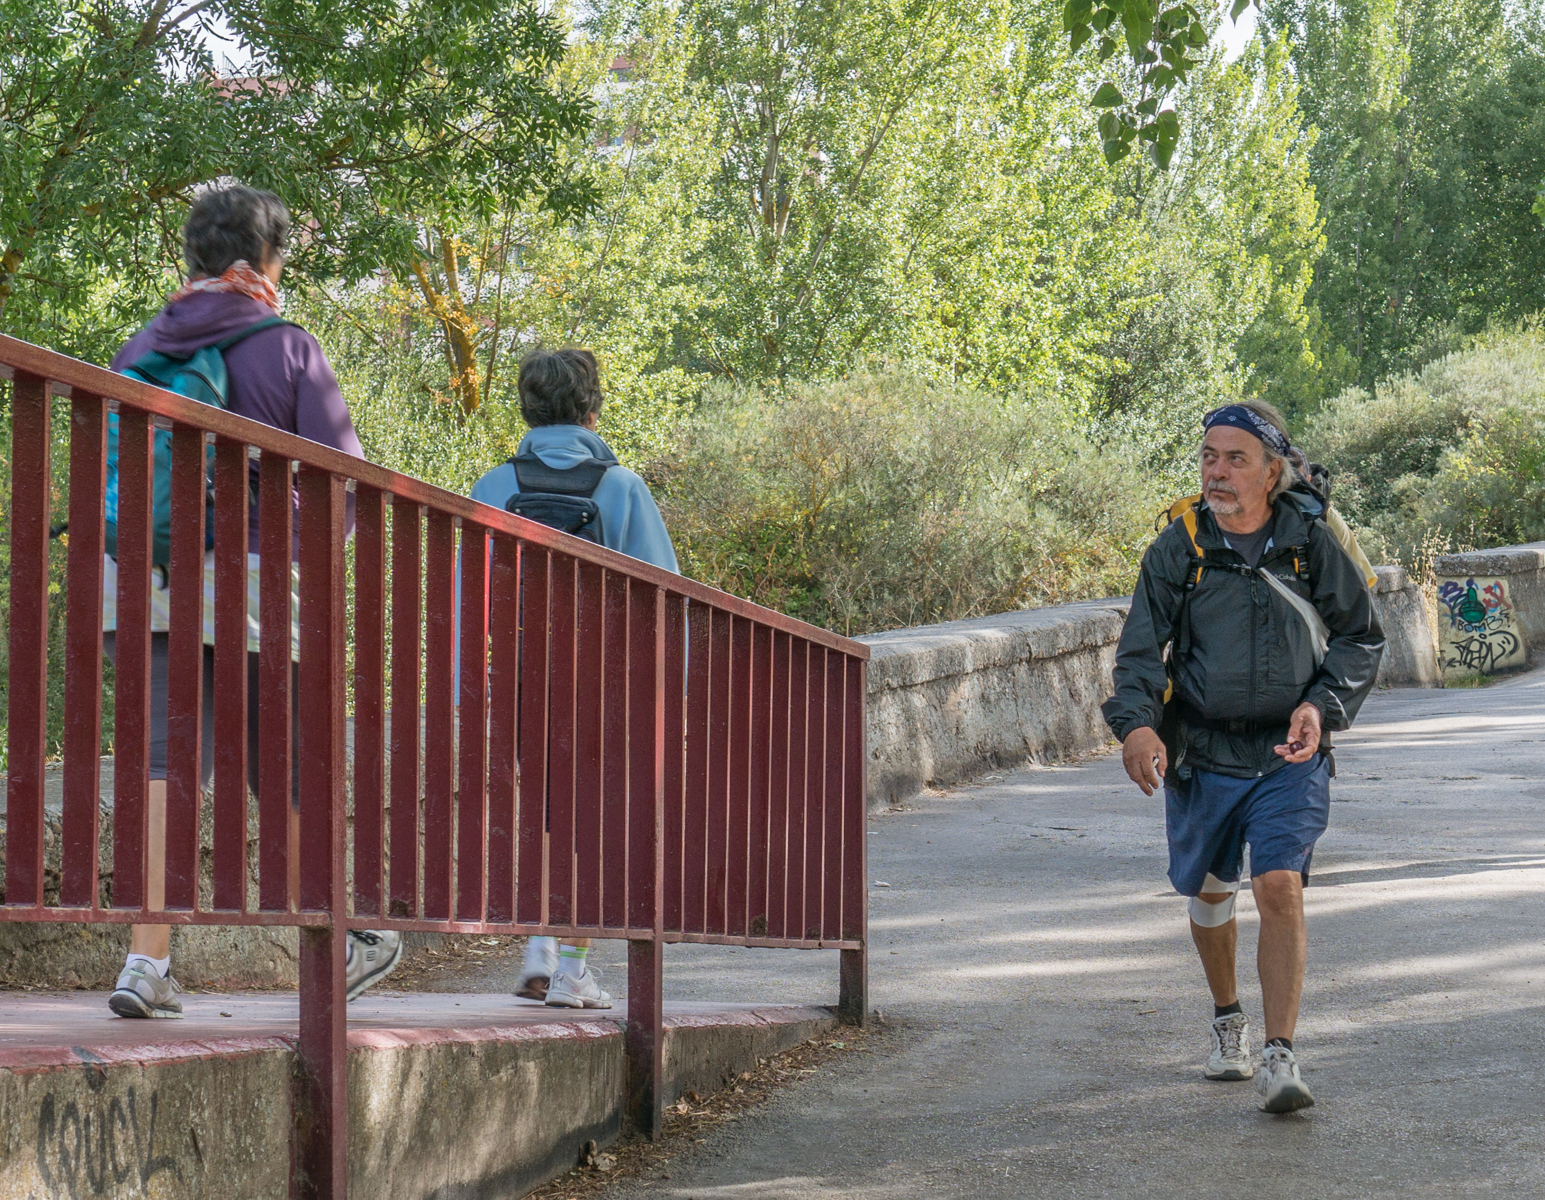 A male pilgrim on the Camino Francés where it’s conjoined with a pedestrian park path adjacent to the rio Arlanzón in Burgos, Spain | Photo by Mike Hudak